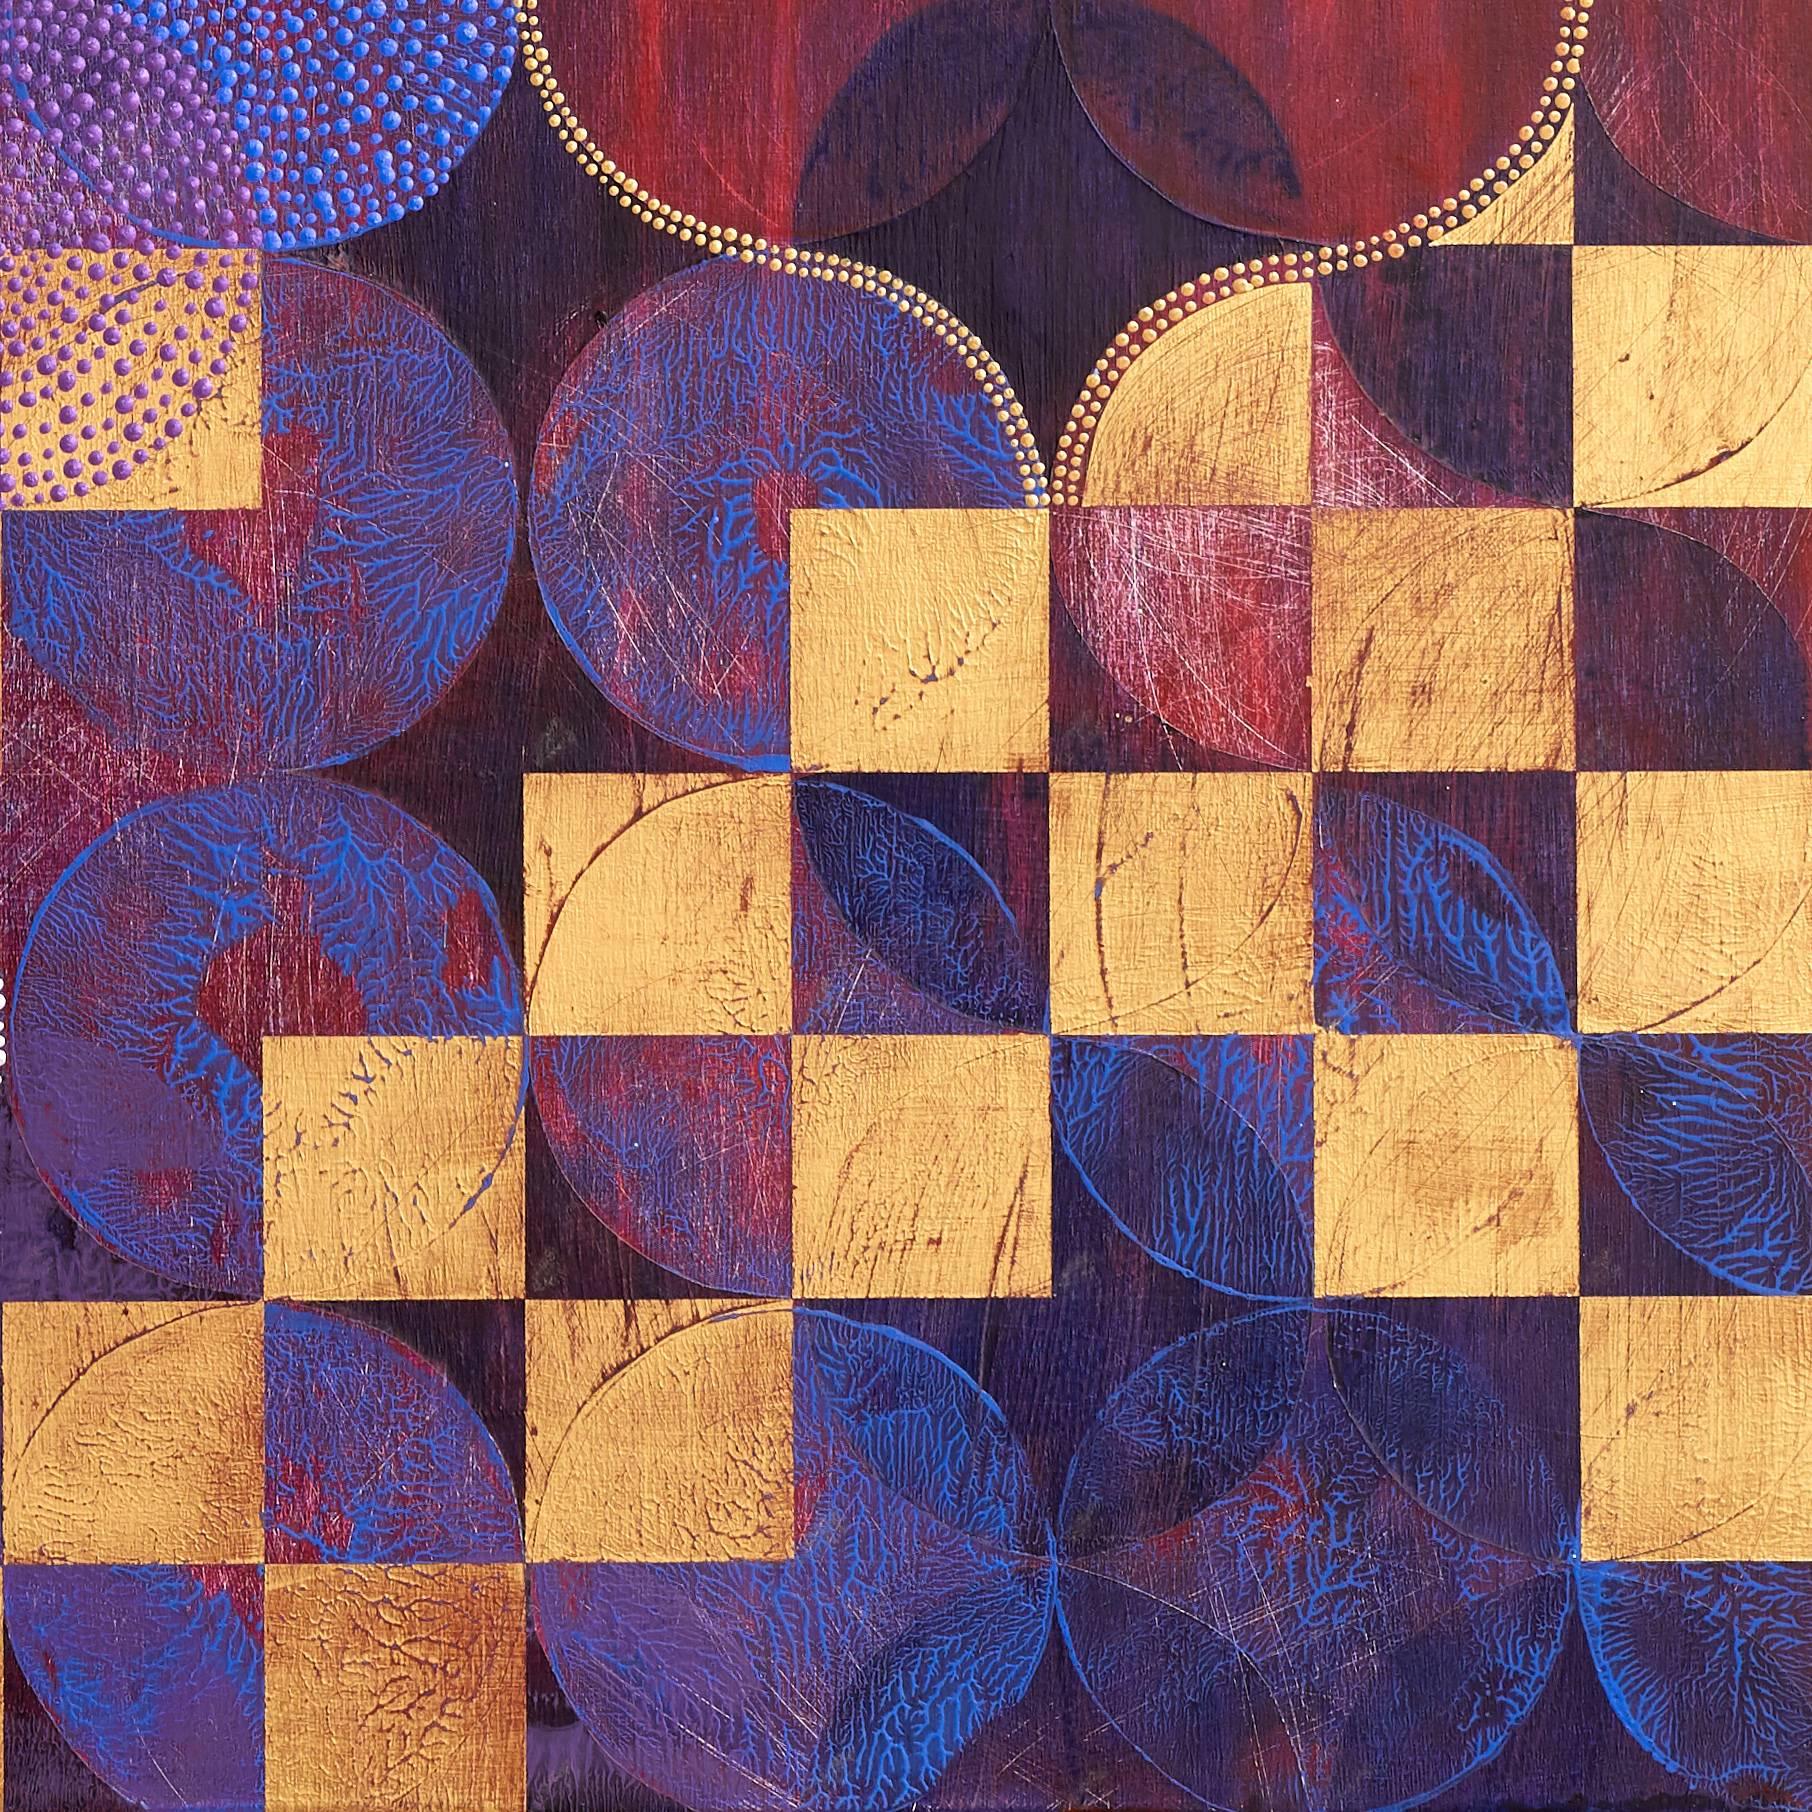 In Denise Driscoll's large geometric painting, 